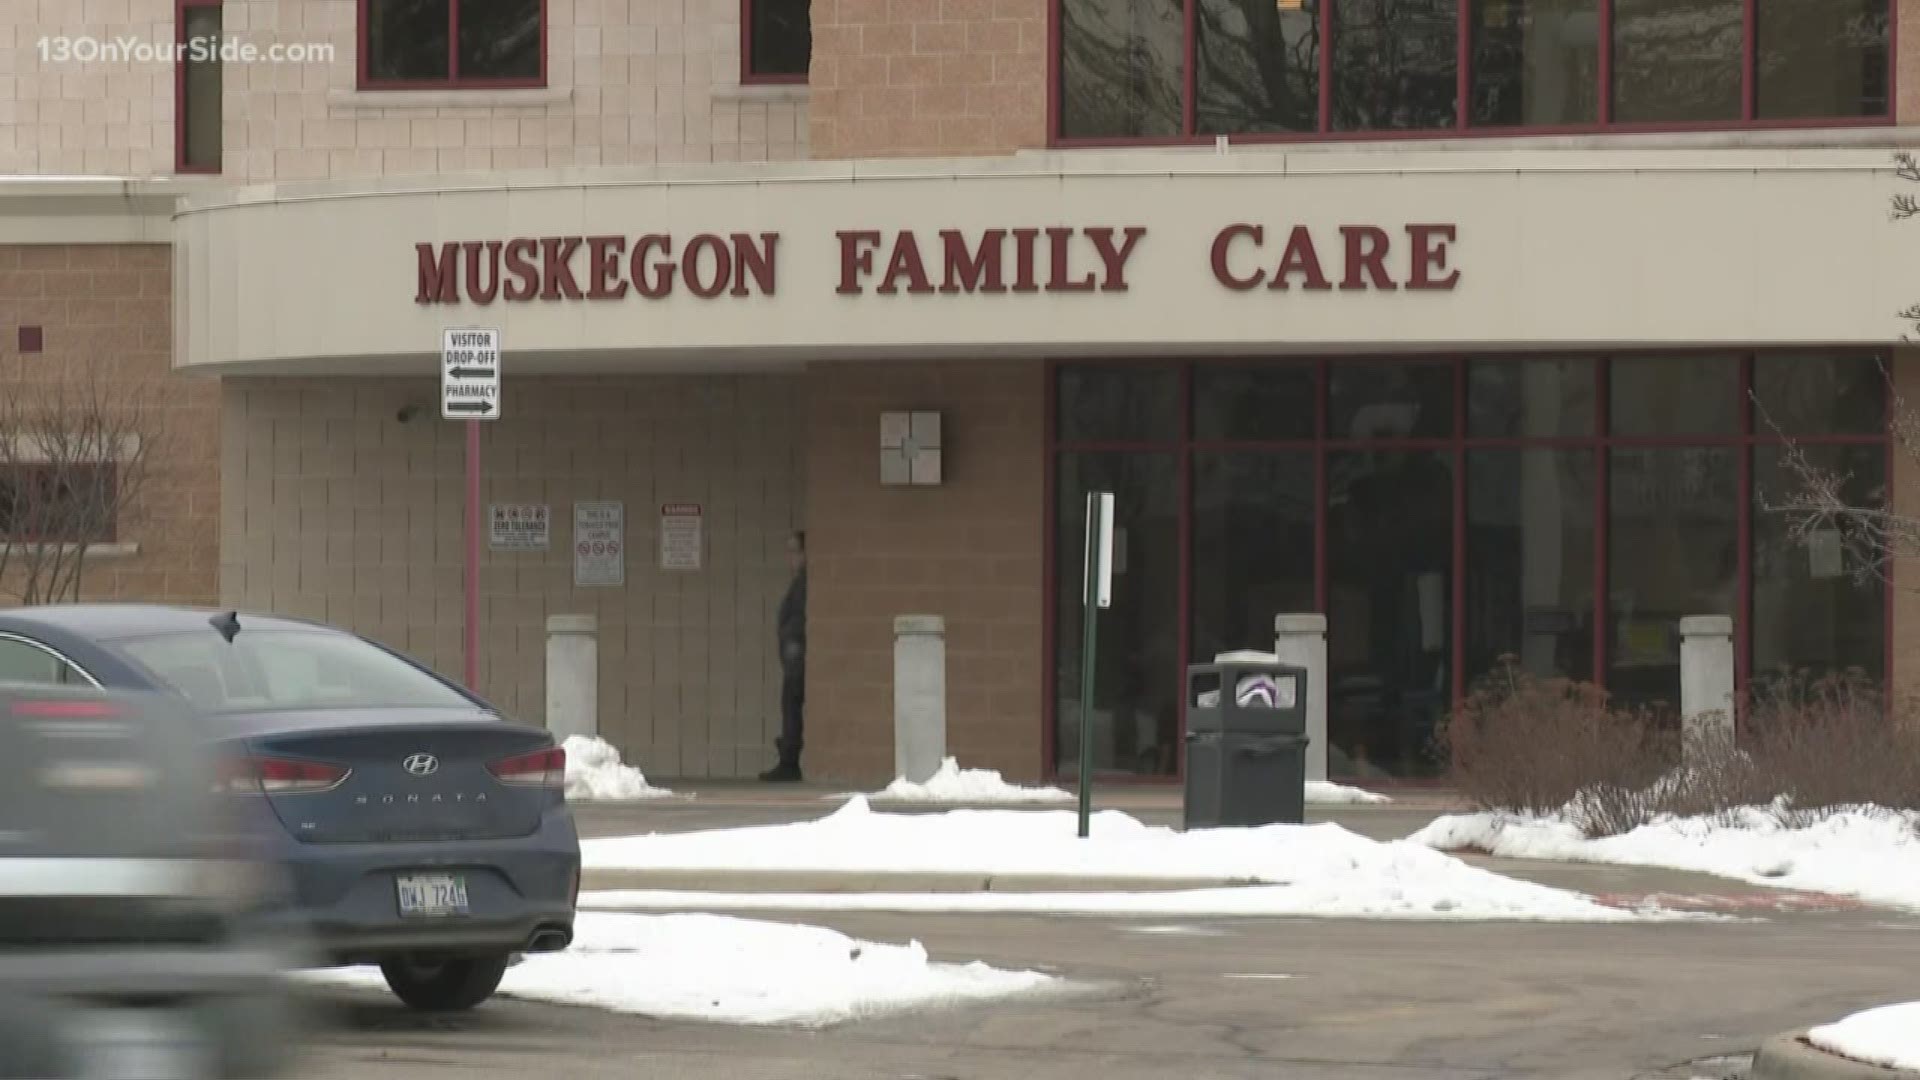 In a statement the health clinic said there was confusion on Friday regarding the closing.